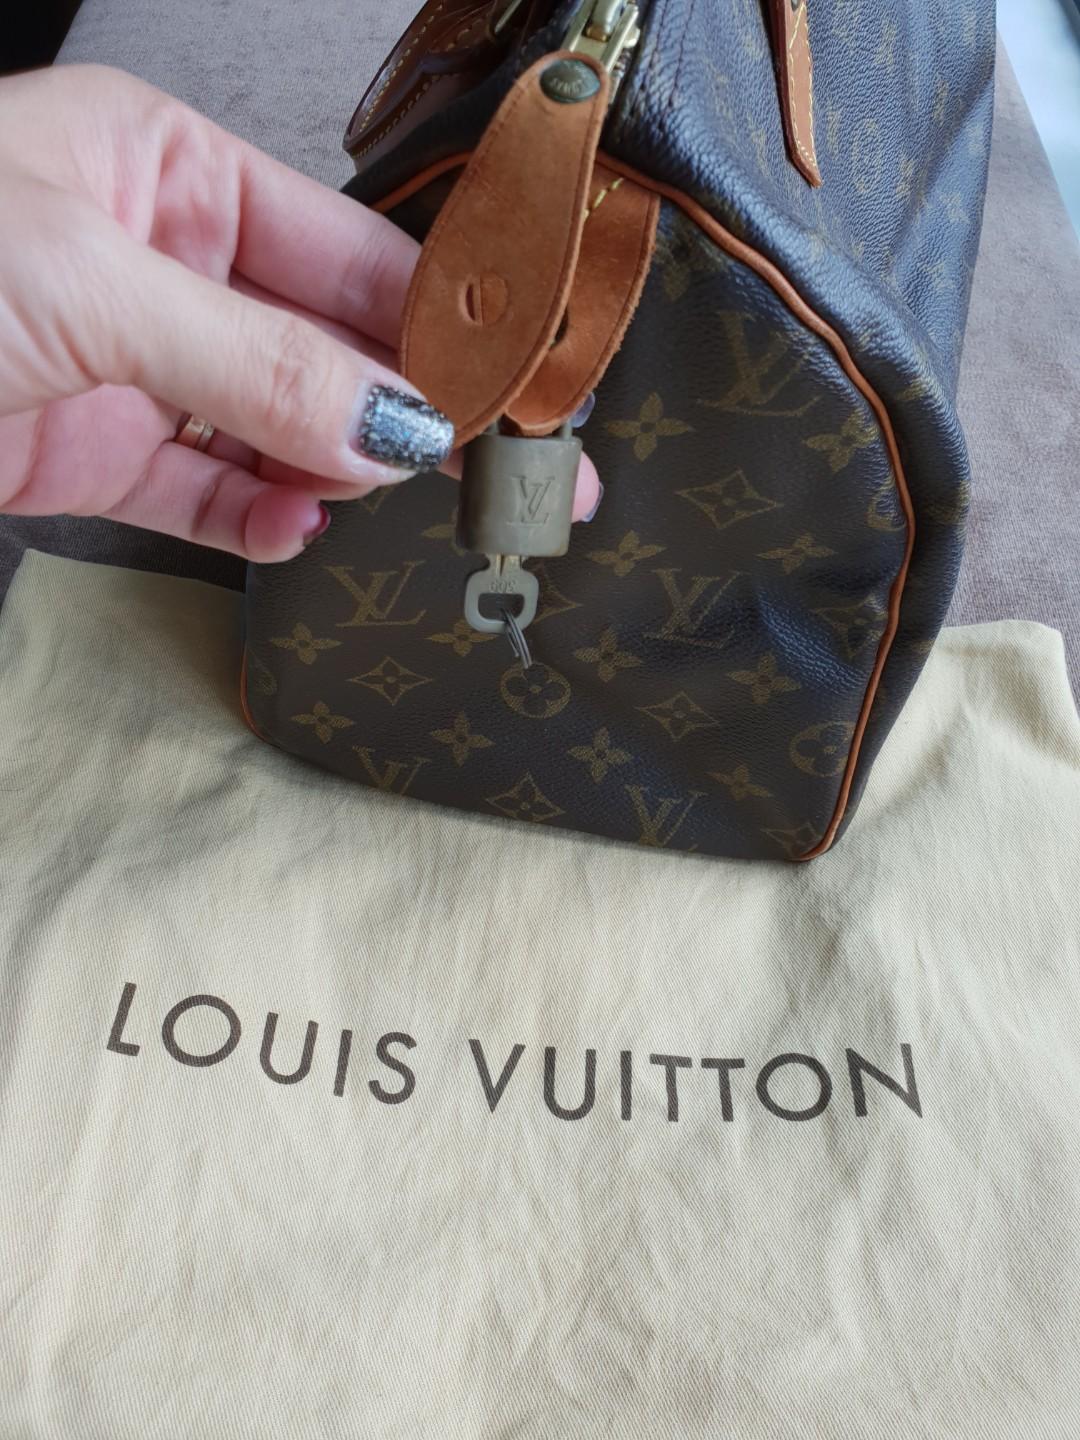 ❗Repriced❗Authentic Vintage Louis Vuitton Speedy 30 with Shoulder Strap,  Luxury, Bags & Wallets on Carousell